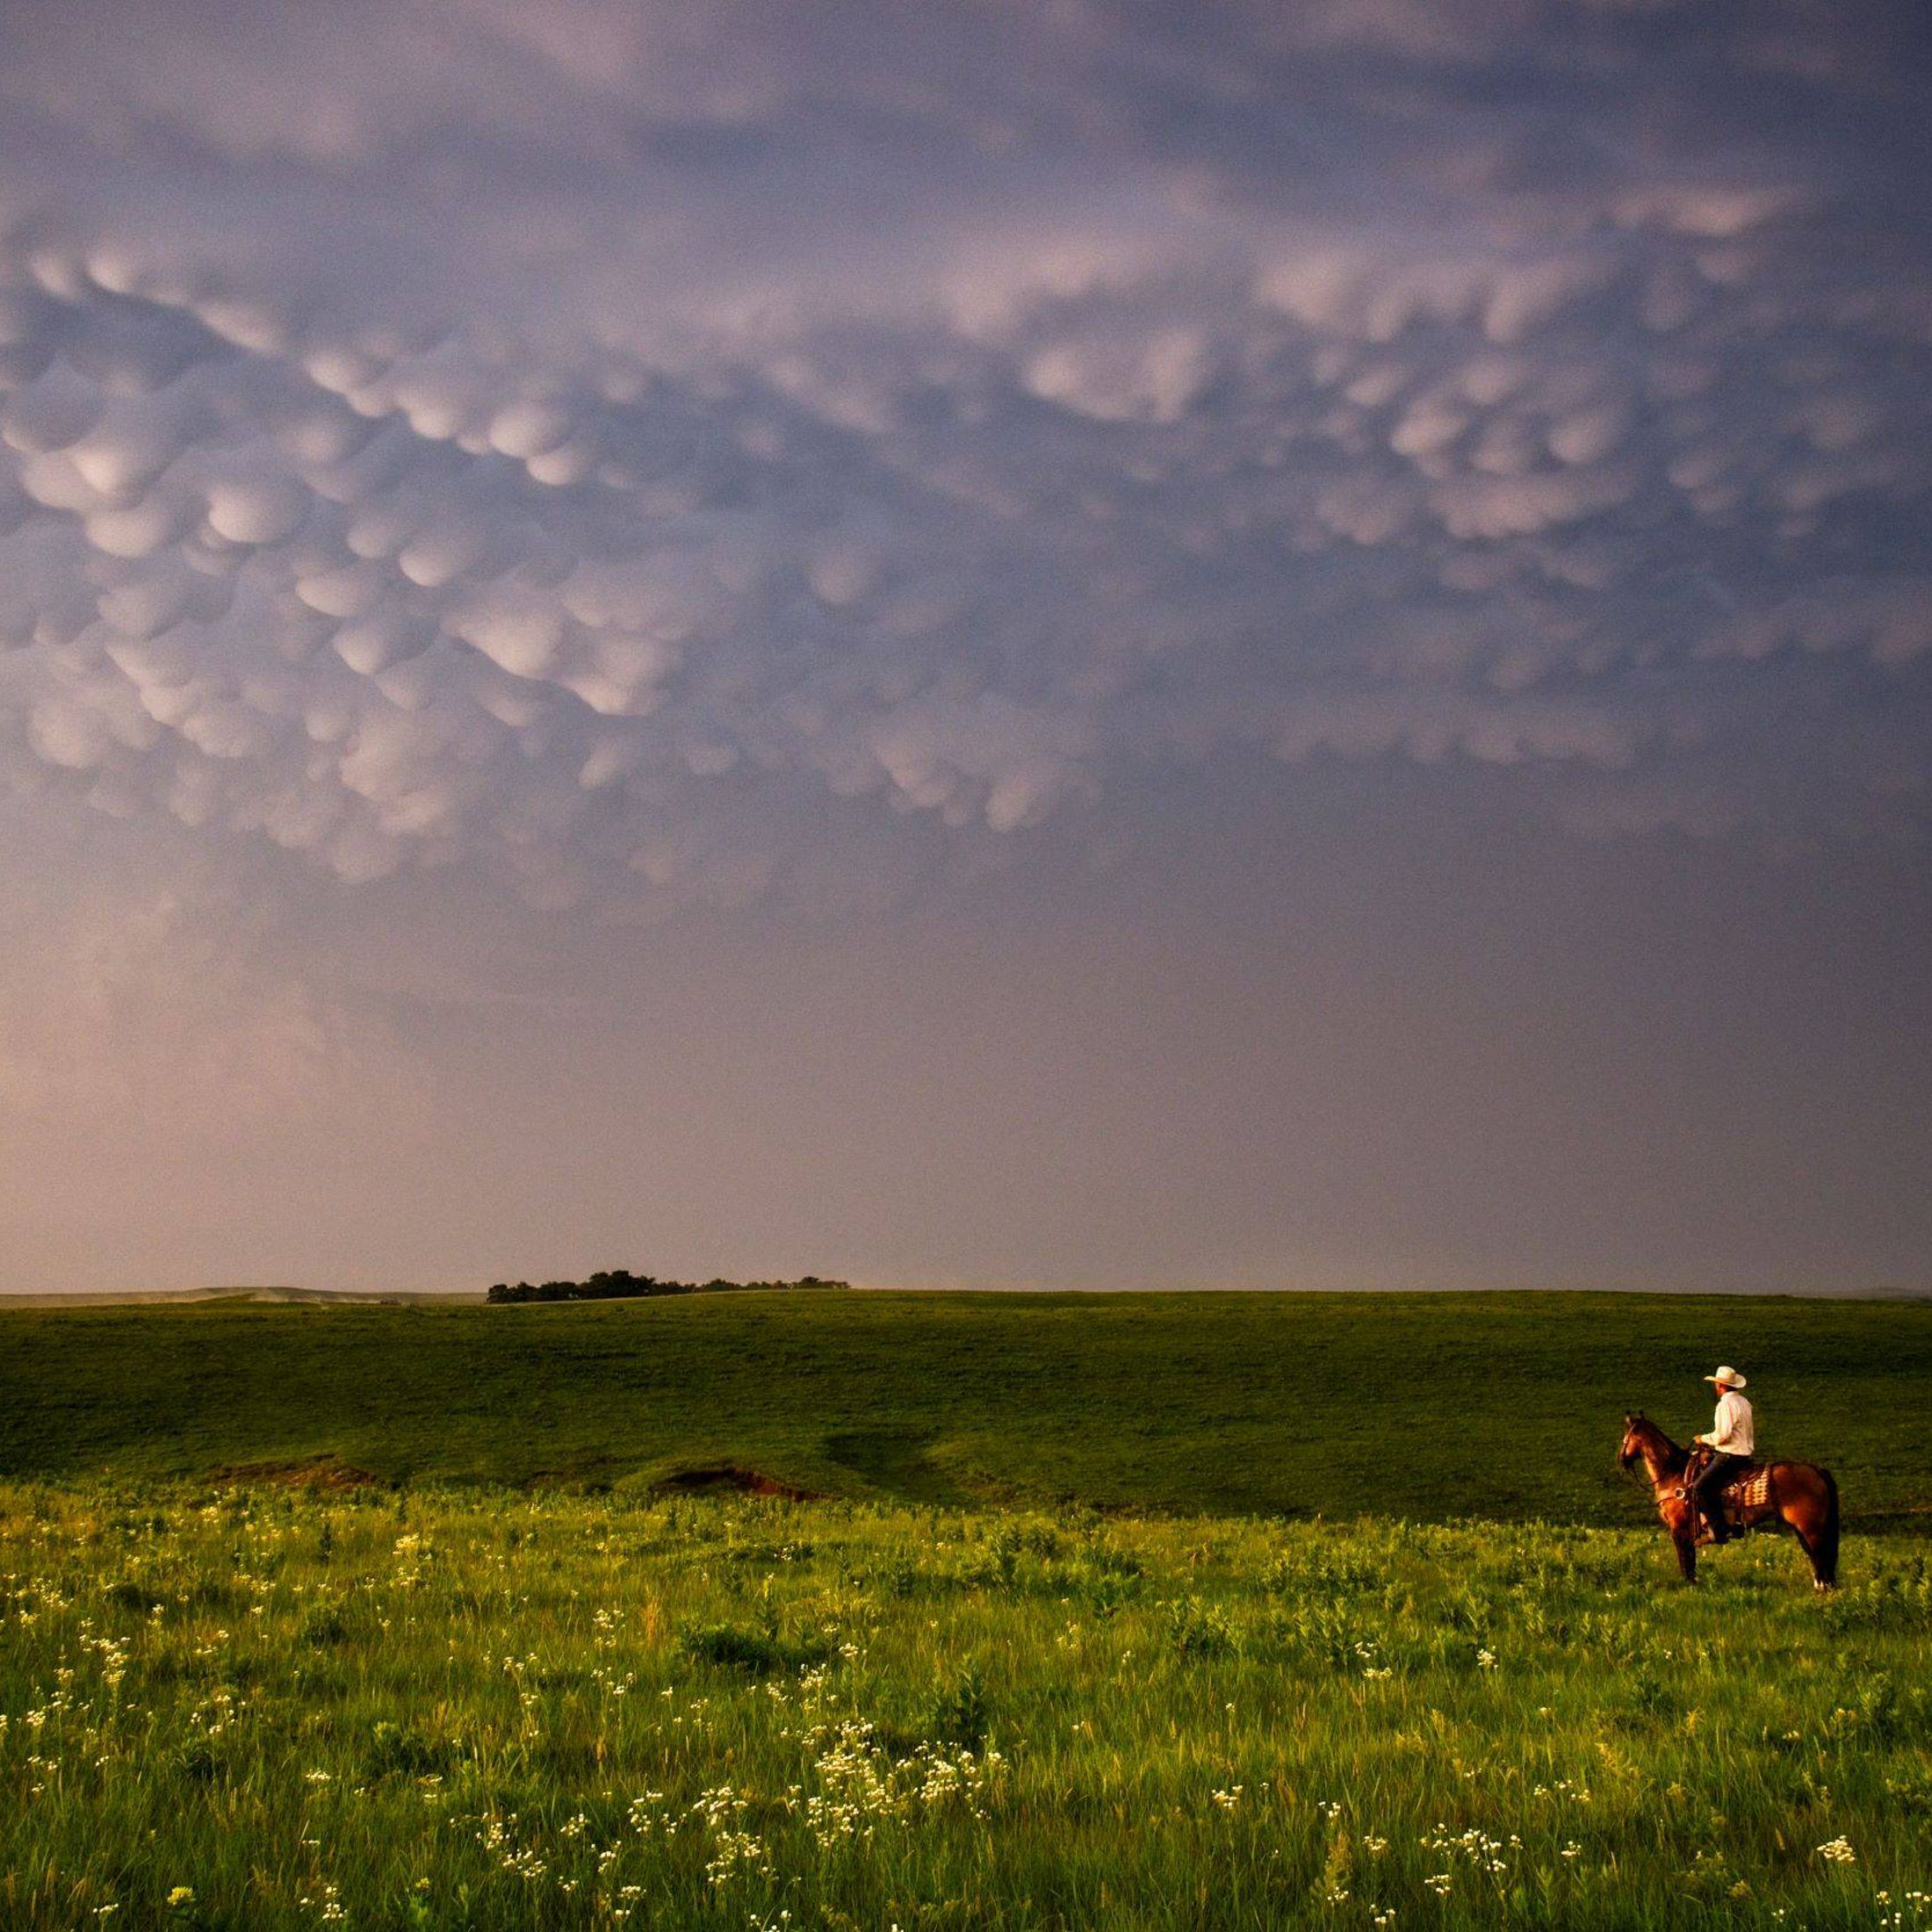 A person riding a horse in a field.